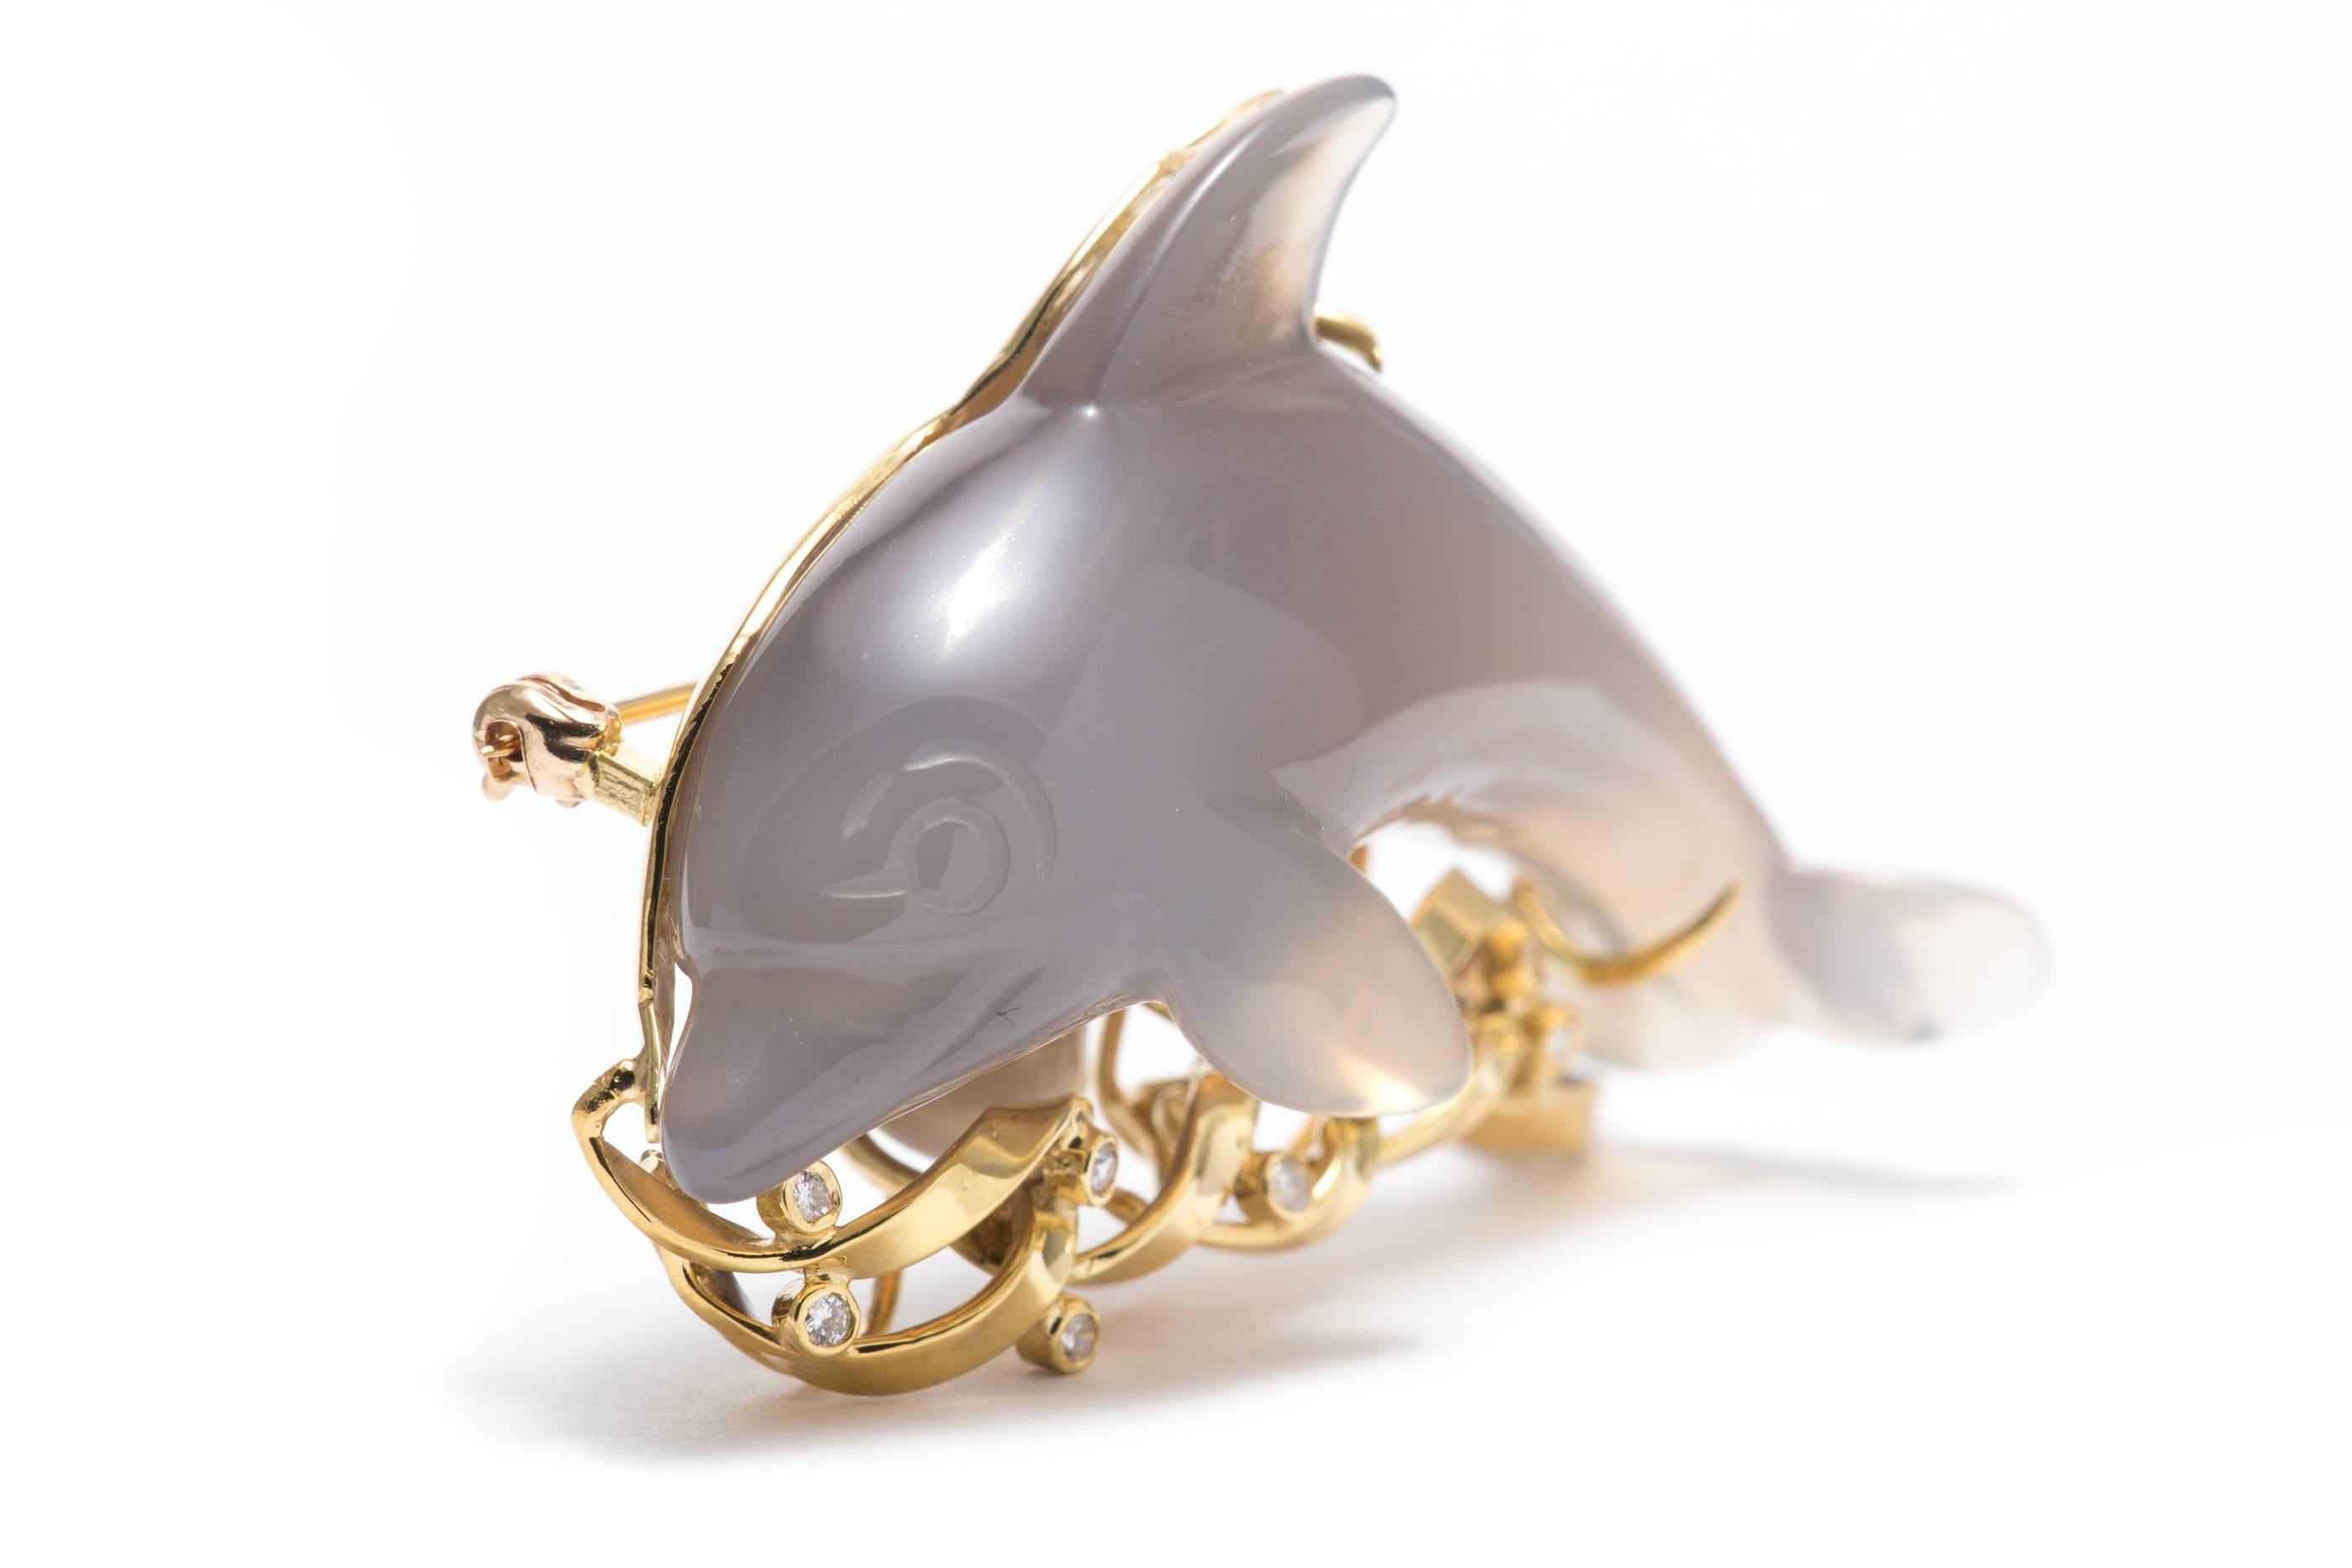 A stunning diamond set brooch designed as a carved chalcedony dolphin atop 18 karat yellow gold and diamond set waves.

Beautifully hand carved in chalcedony, the dolphin is depicted swimming over a sea of 18 karat yellow gold.  Embellished with